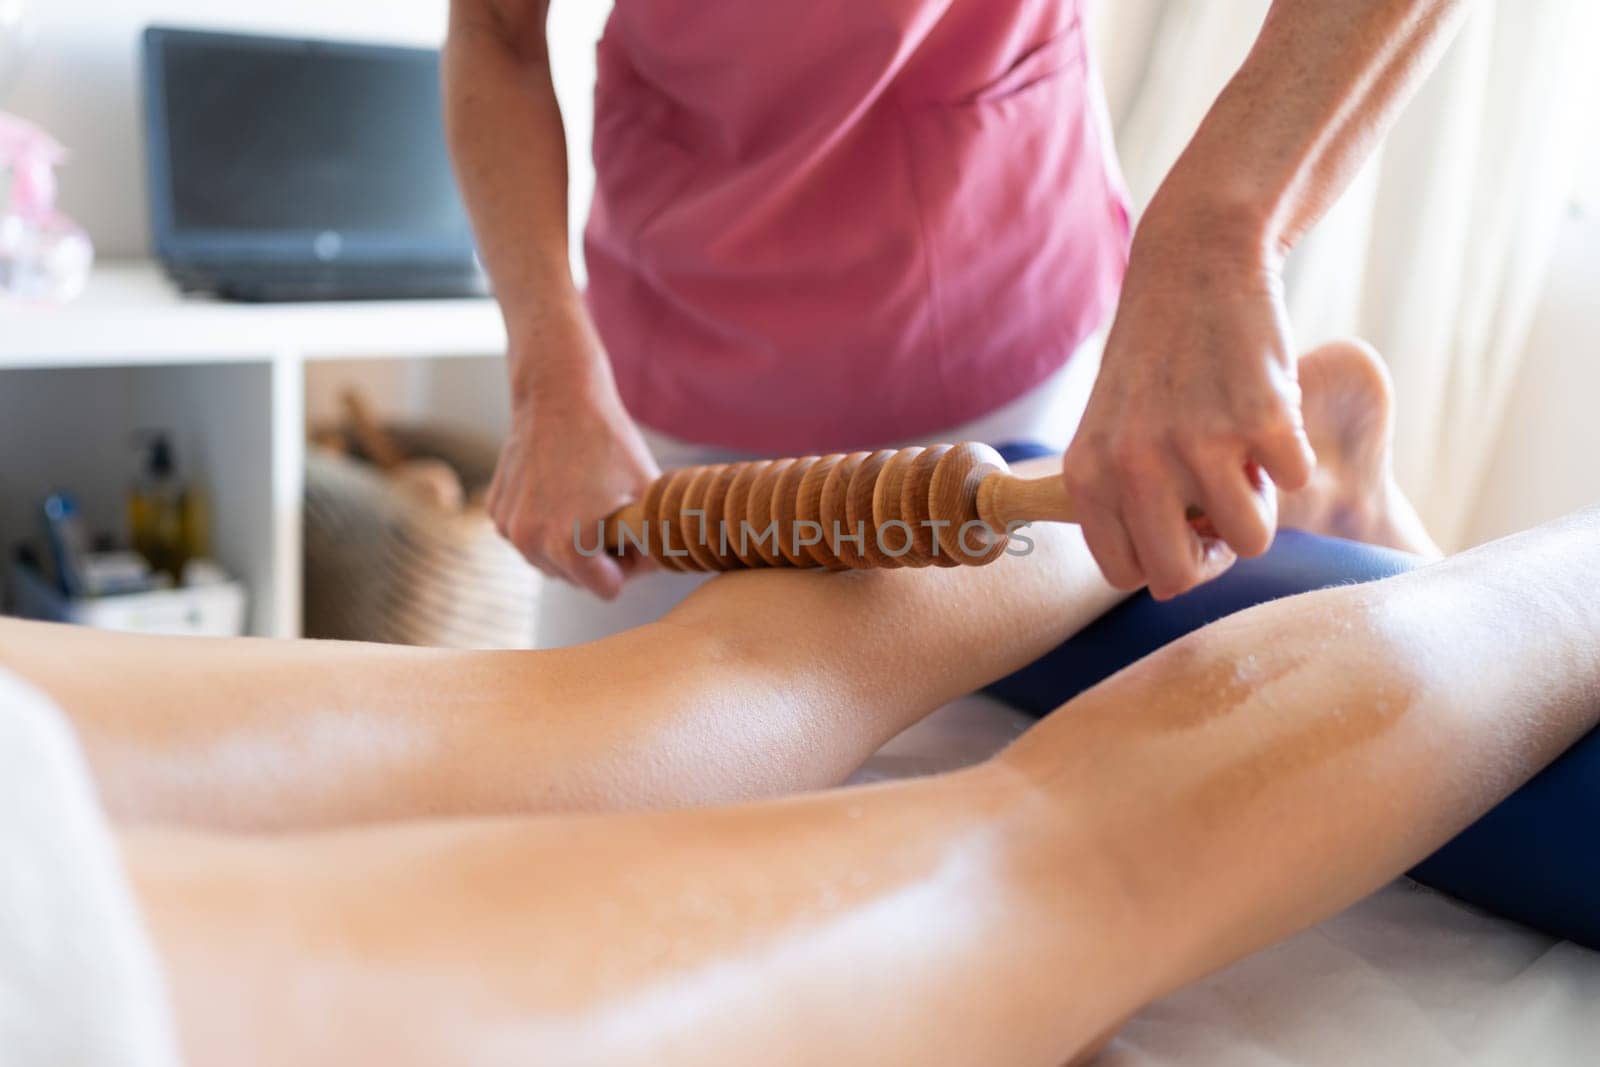 Crop anonymous female osteopathy therapist using wooden device while massaging leg of patient during physiotherapy session in bright modern clinic